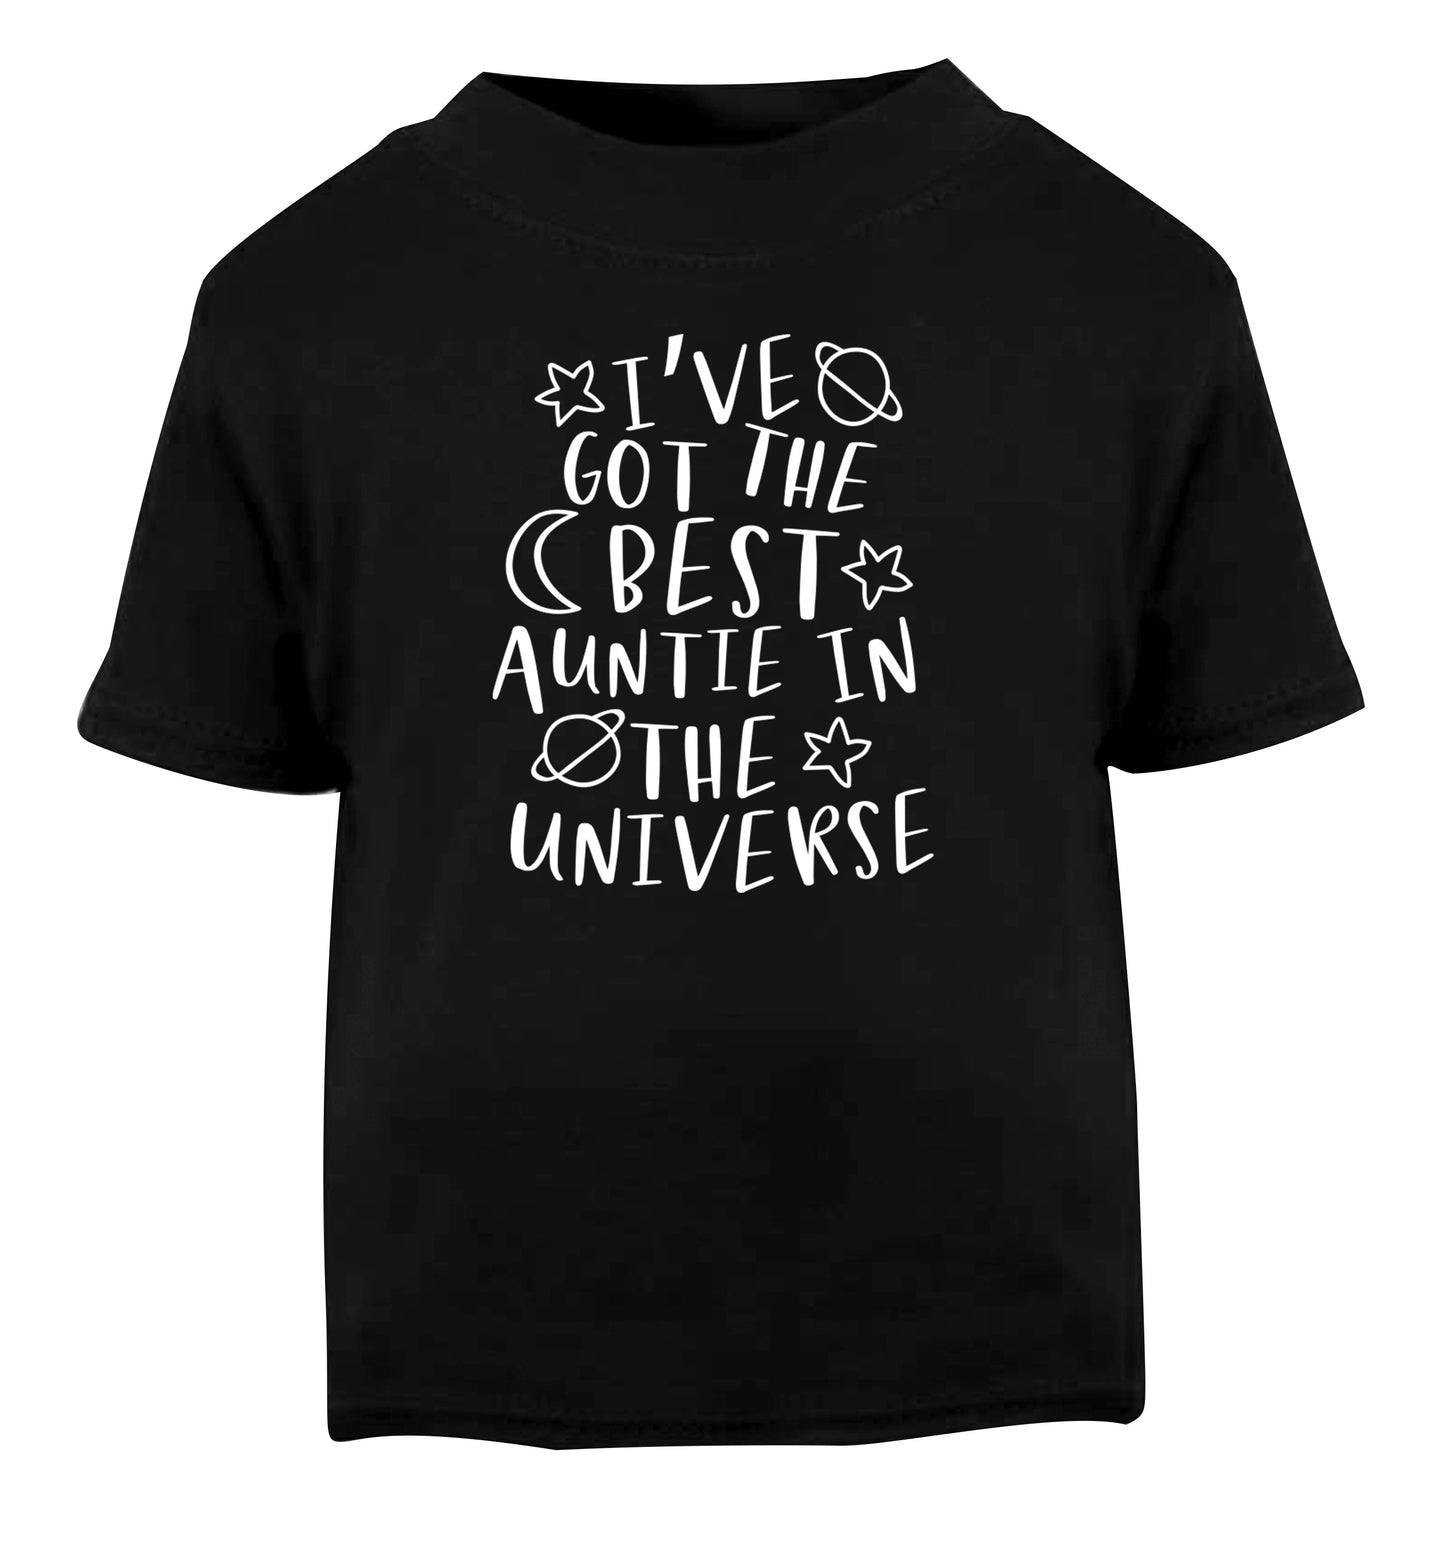 I've got the best auntie in the universe Black Baby Toddler Tshirt 2 years